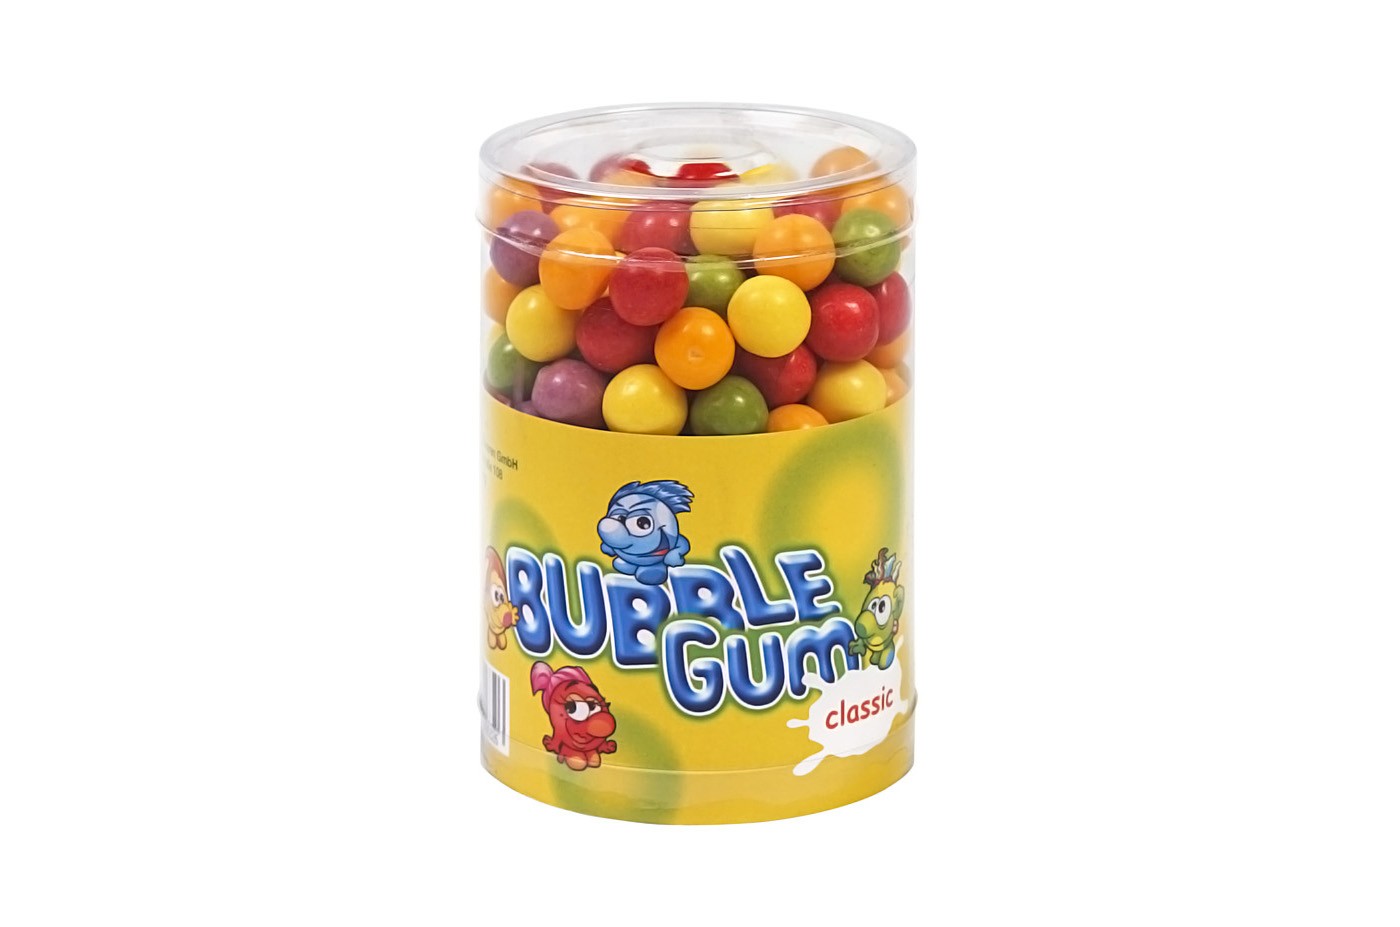 500g bubble gum balls classic in can